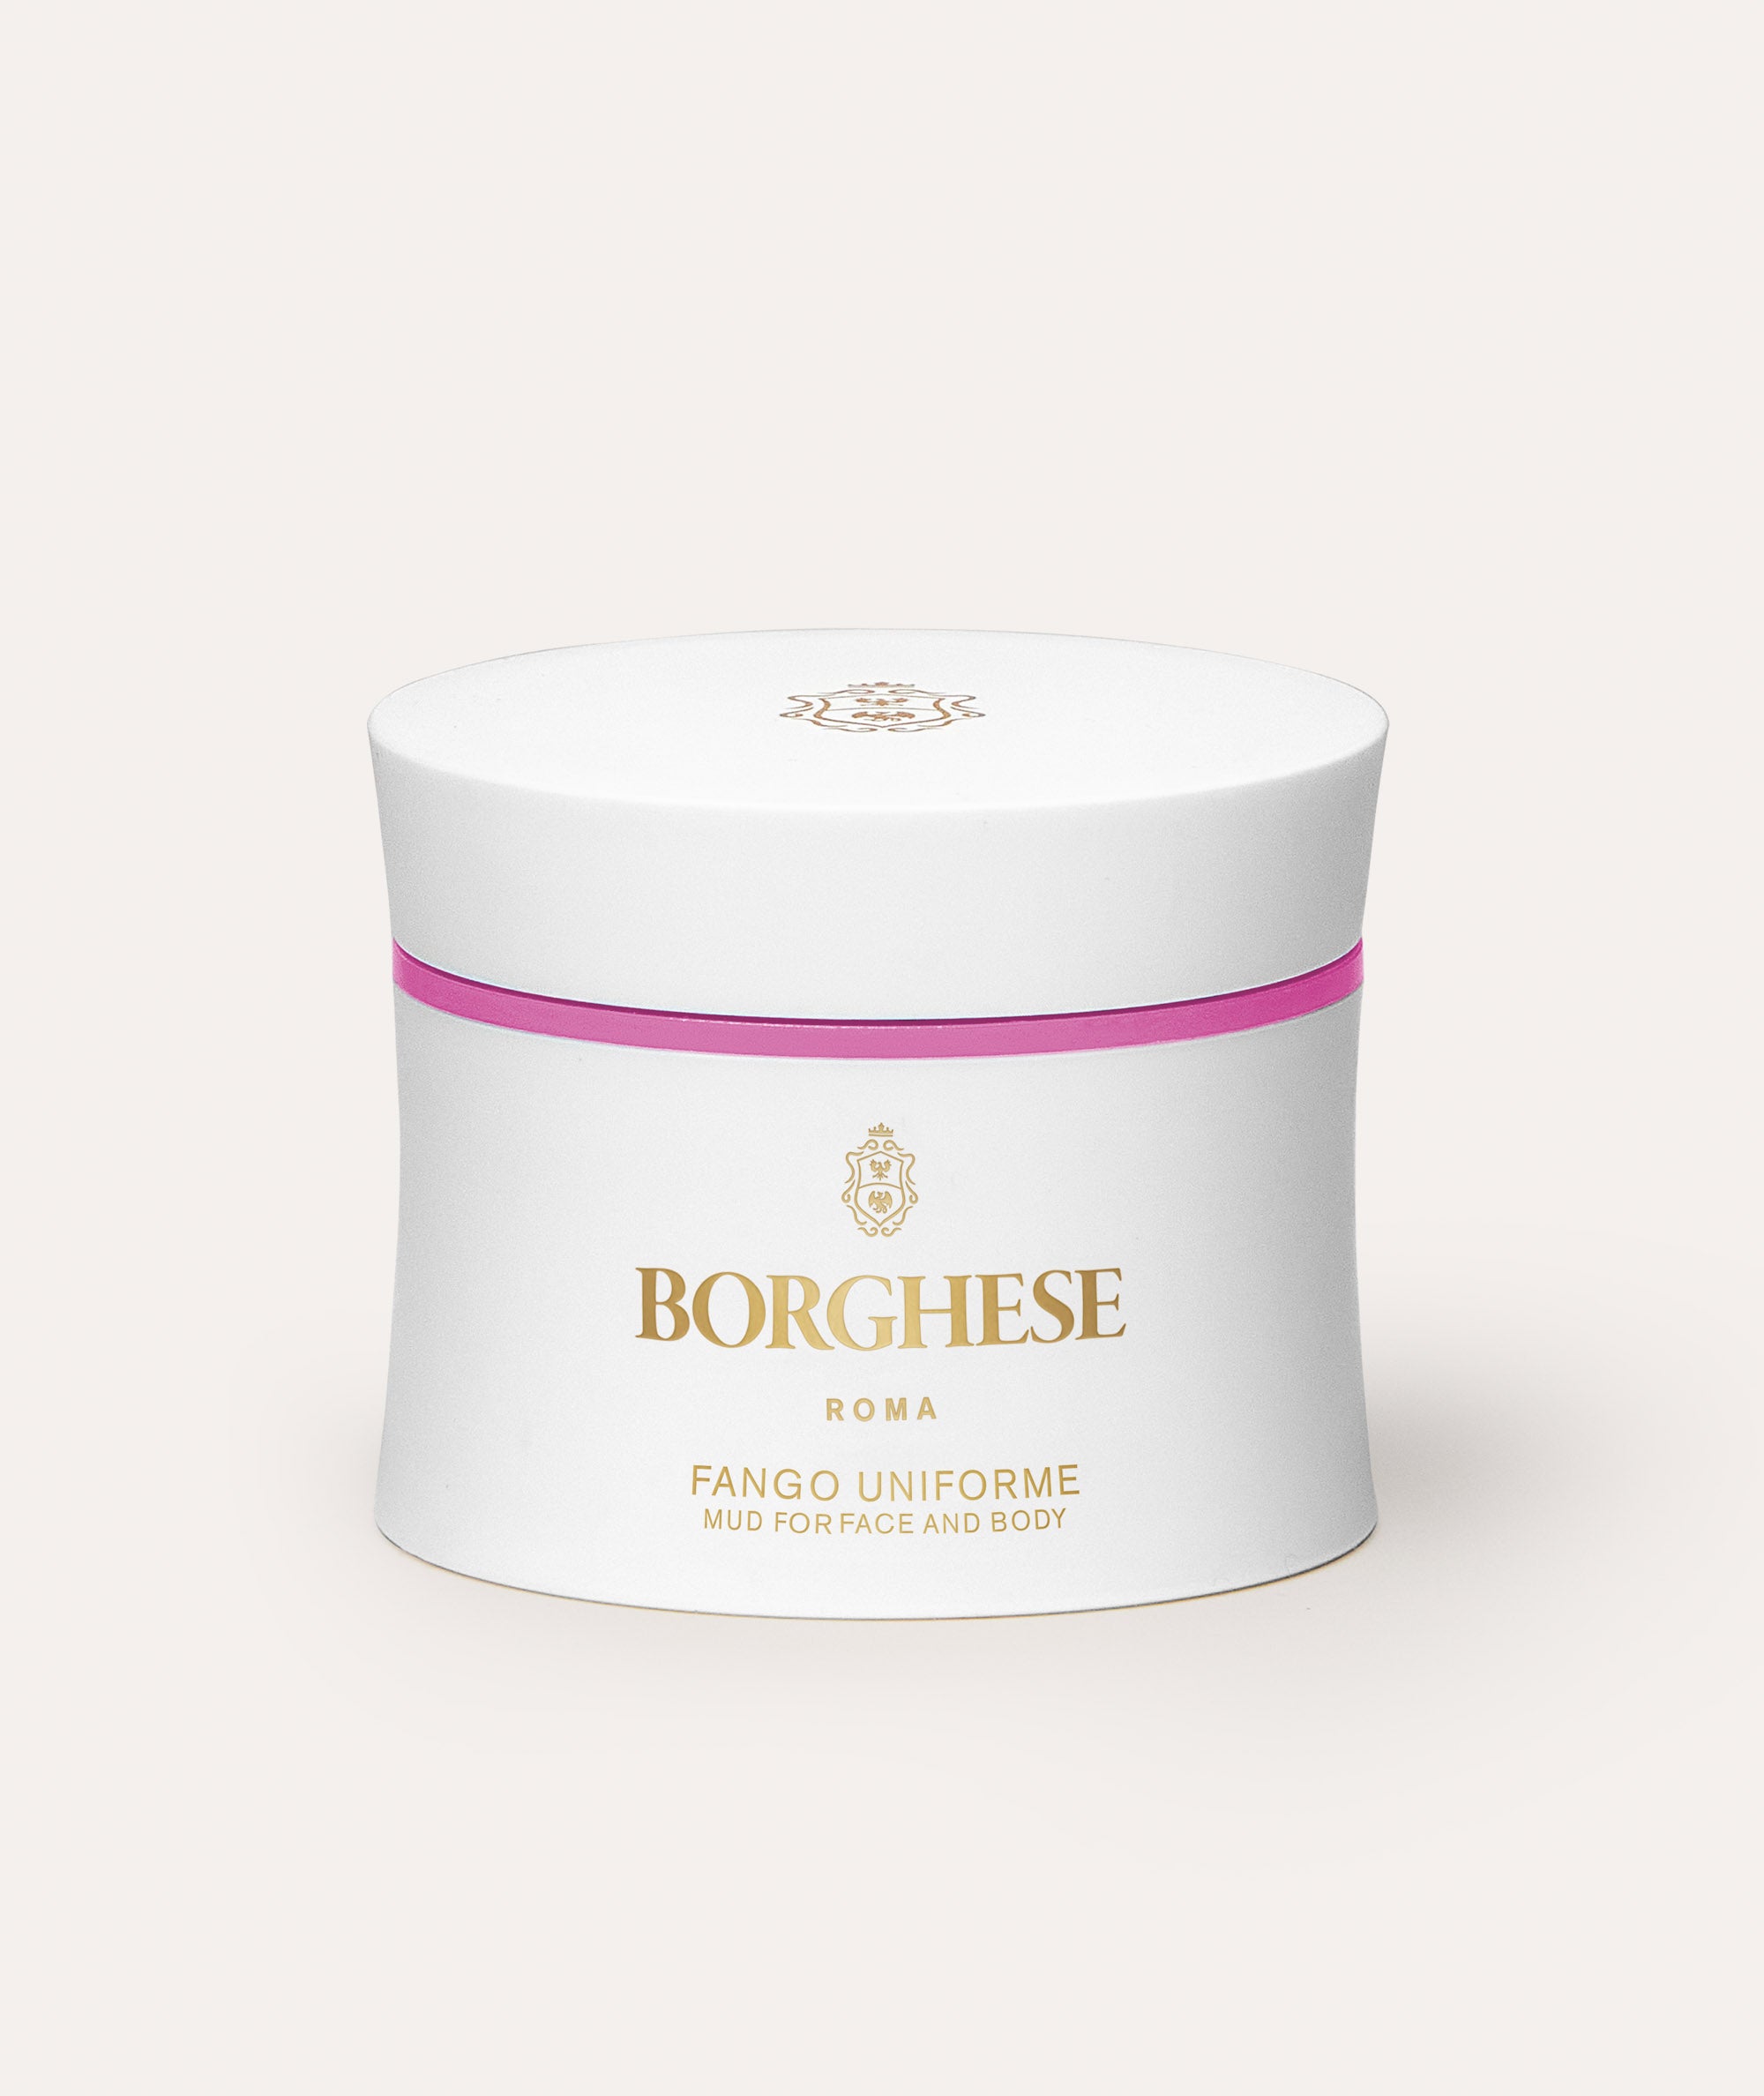 This is a picture of the Borghese Fango Uniforme Brightening Mud Mask in a white jar